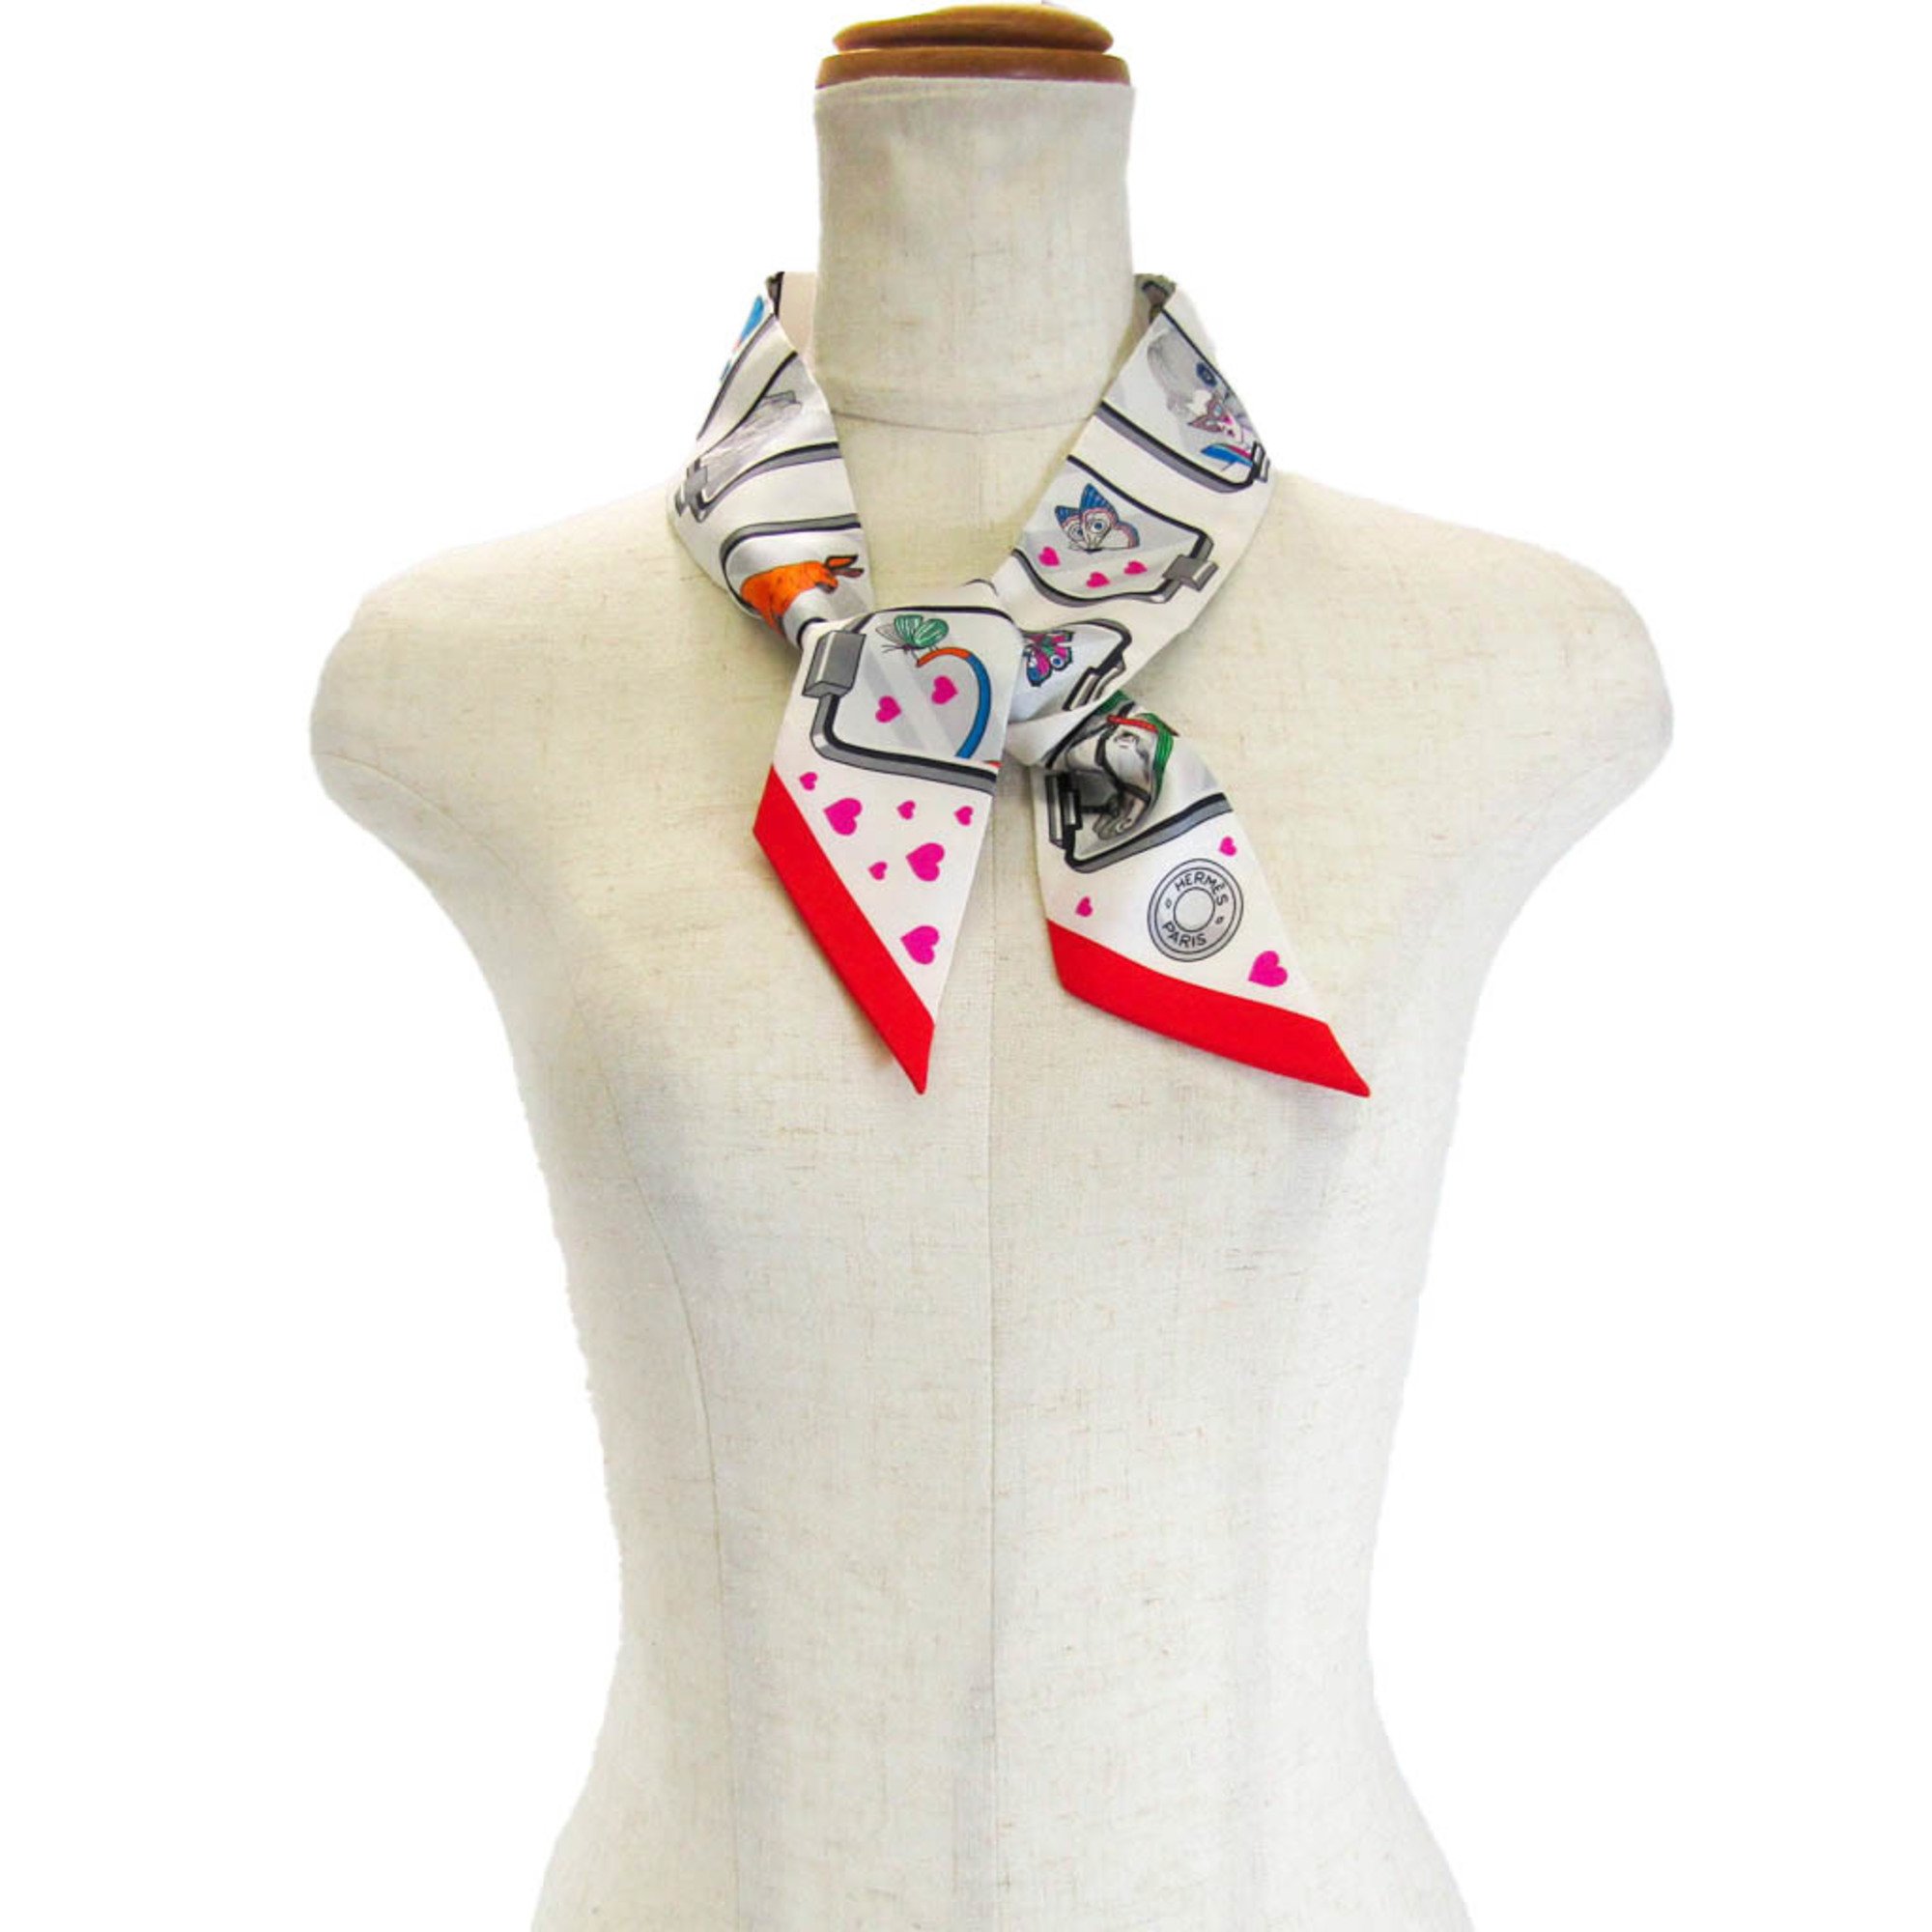 Hermes Twilly Hermes Story Twilly Women's Silk Scarf Multi-color,White